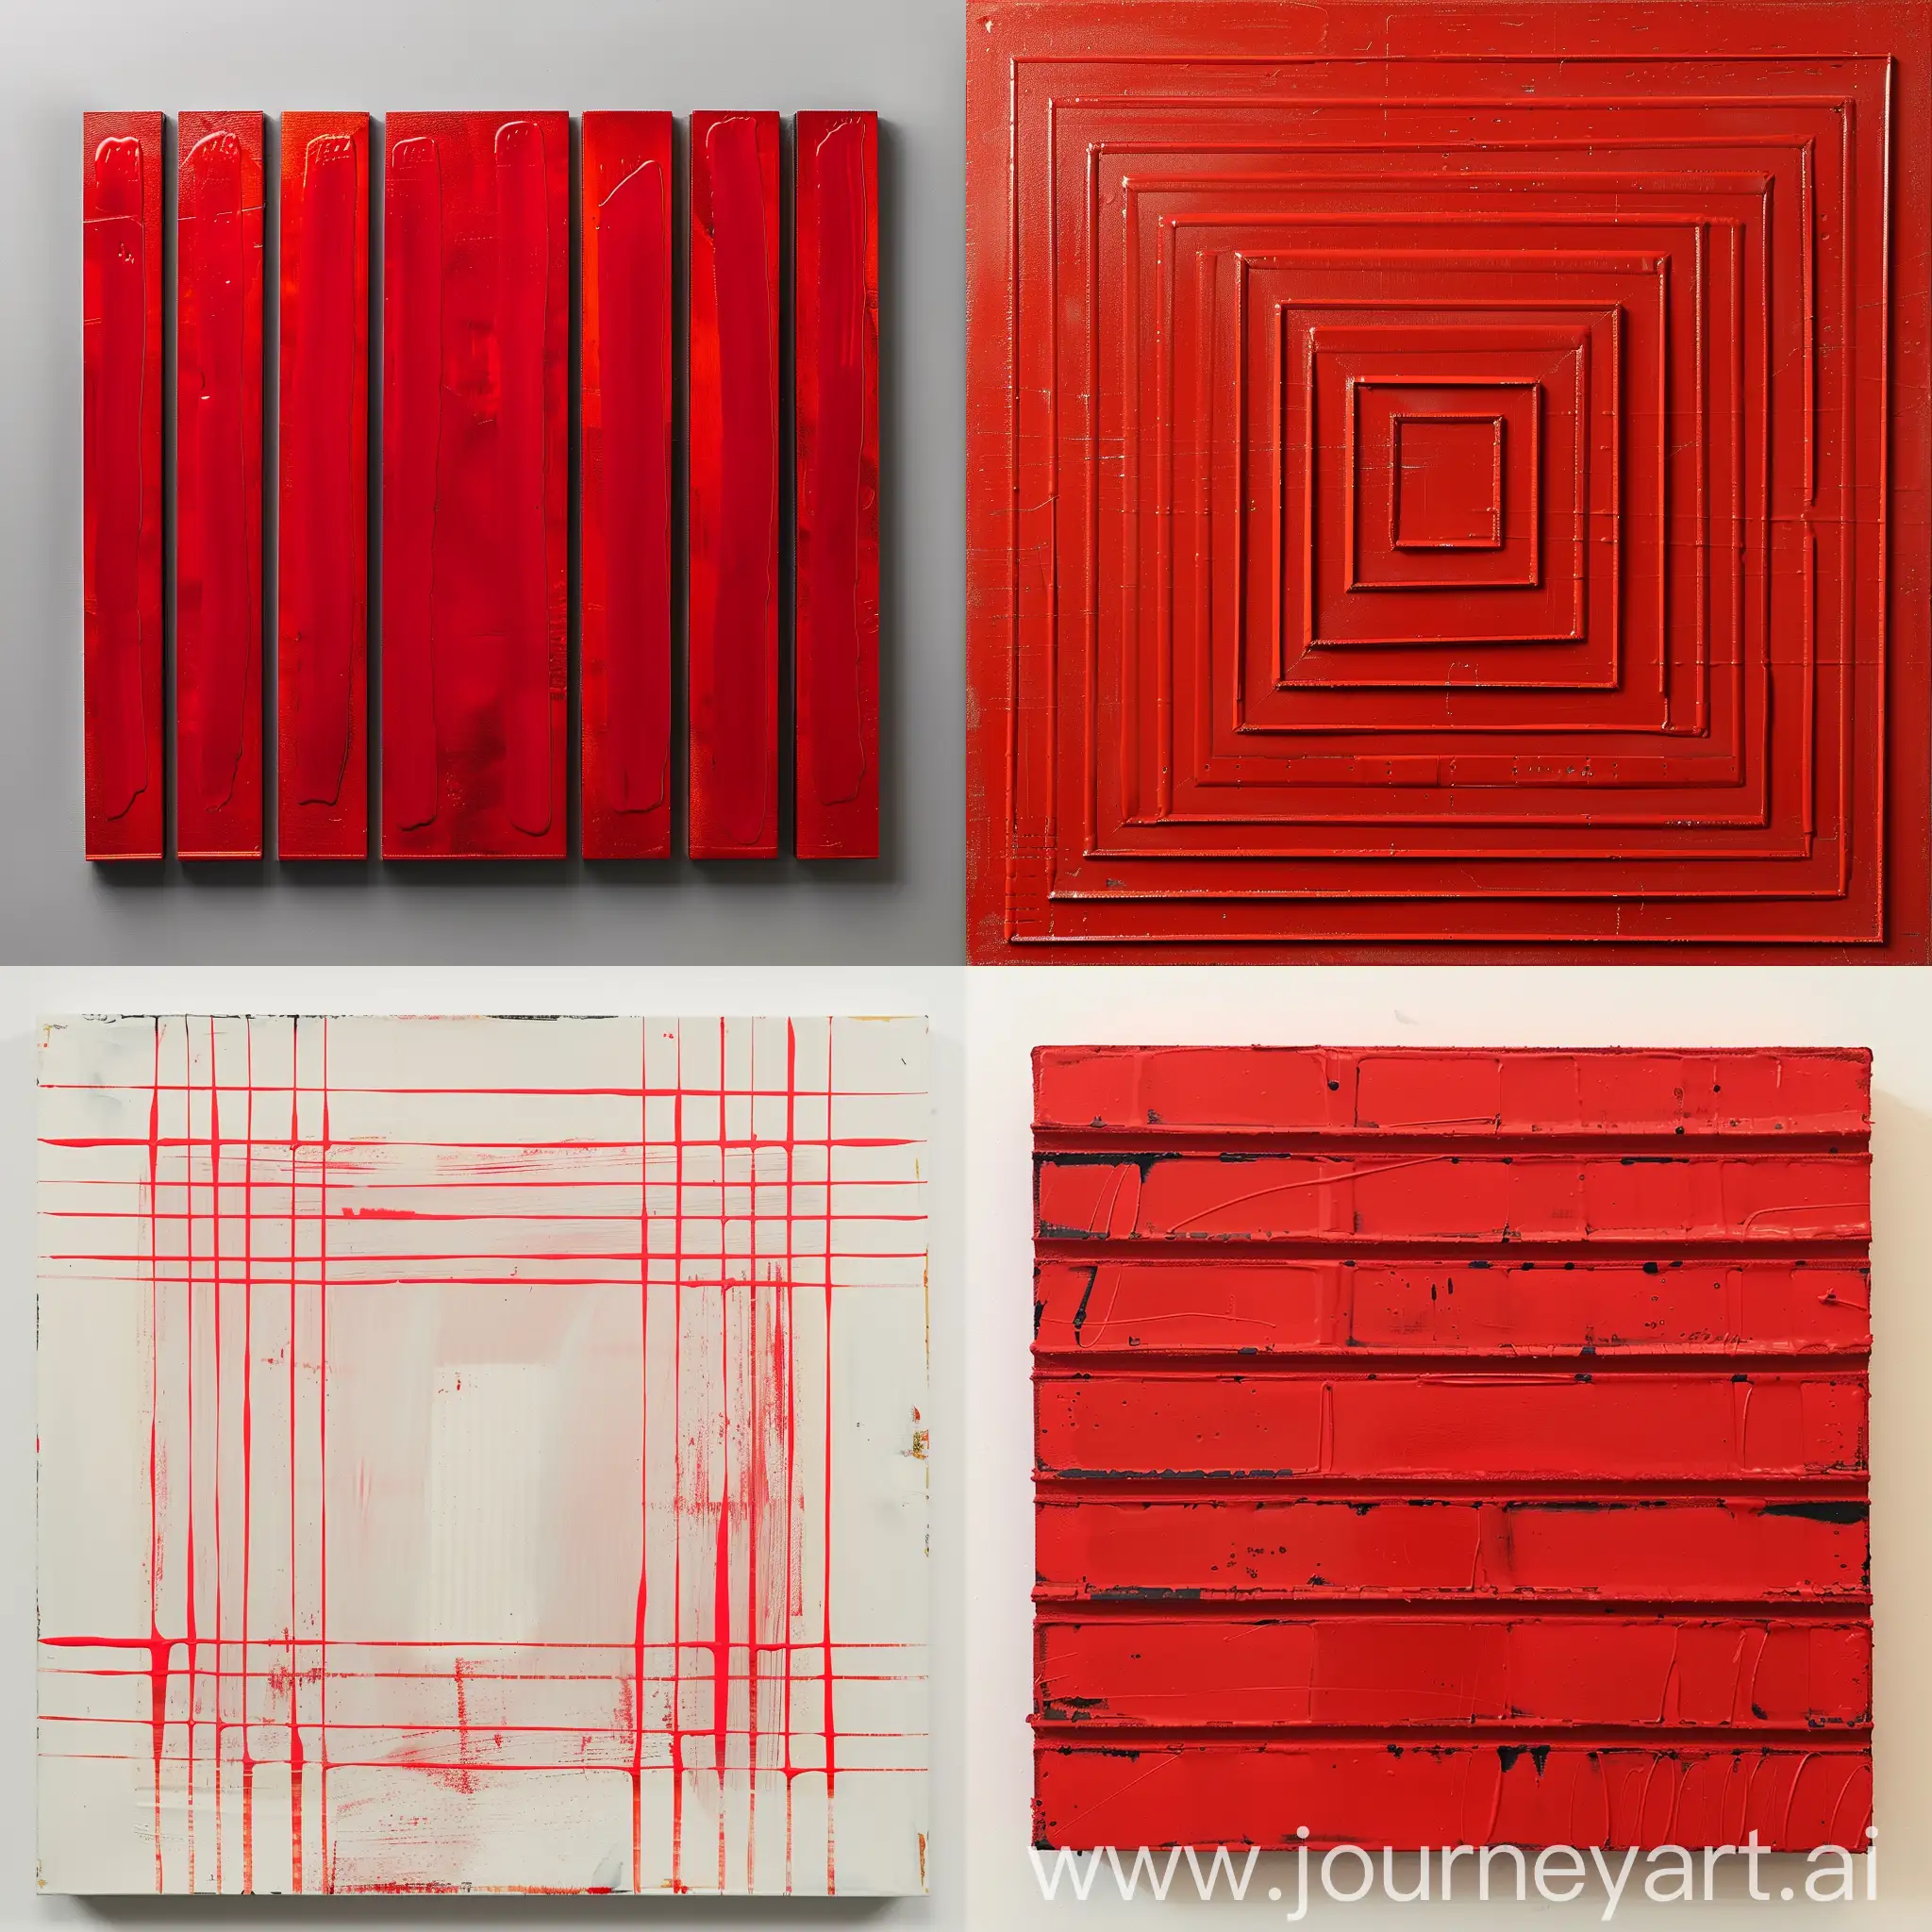 Abstract-Composition-with-Seven-Red-Lines-Intersecting